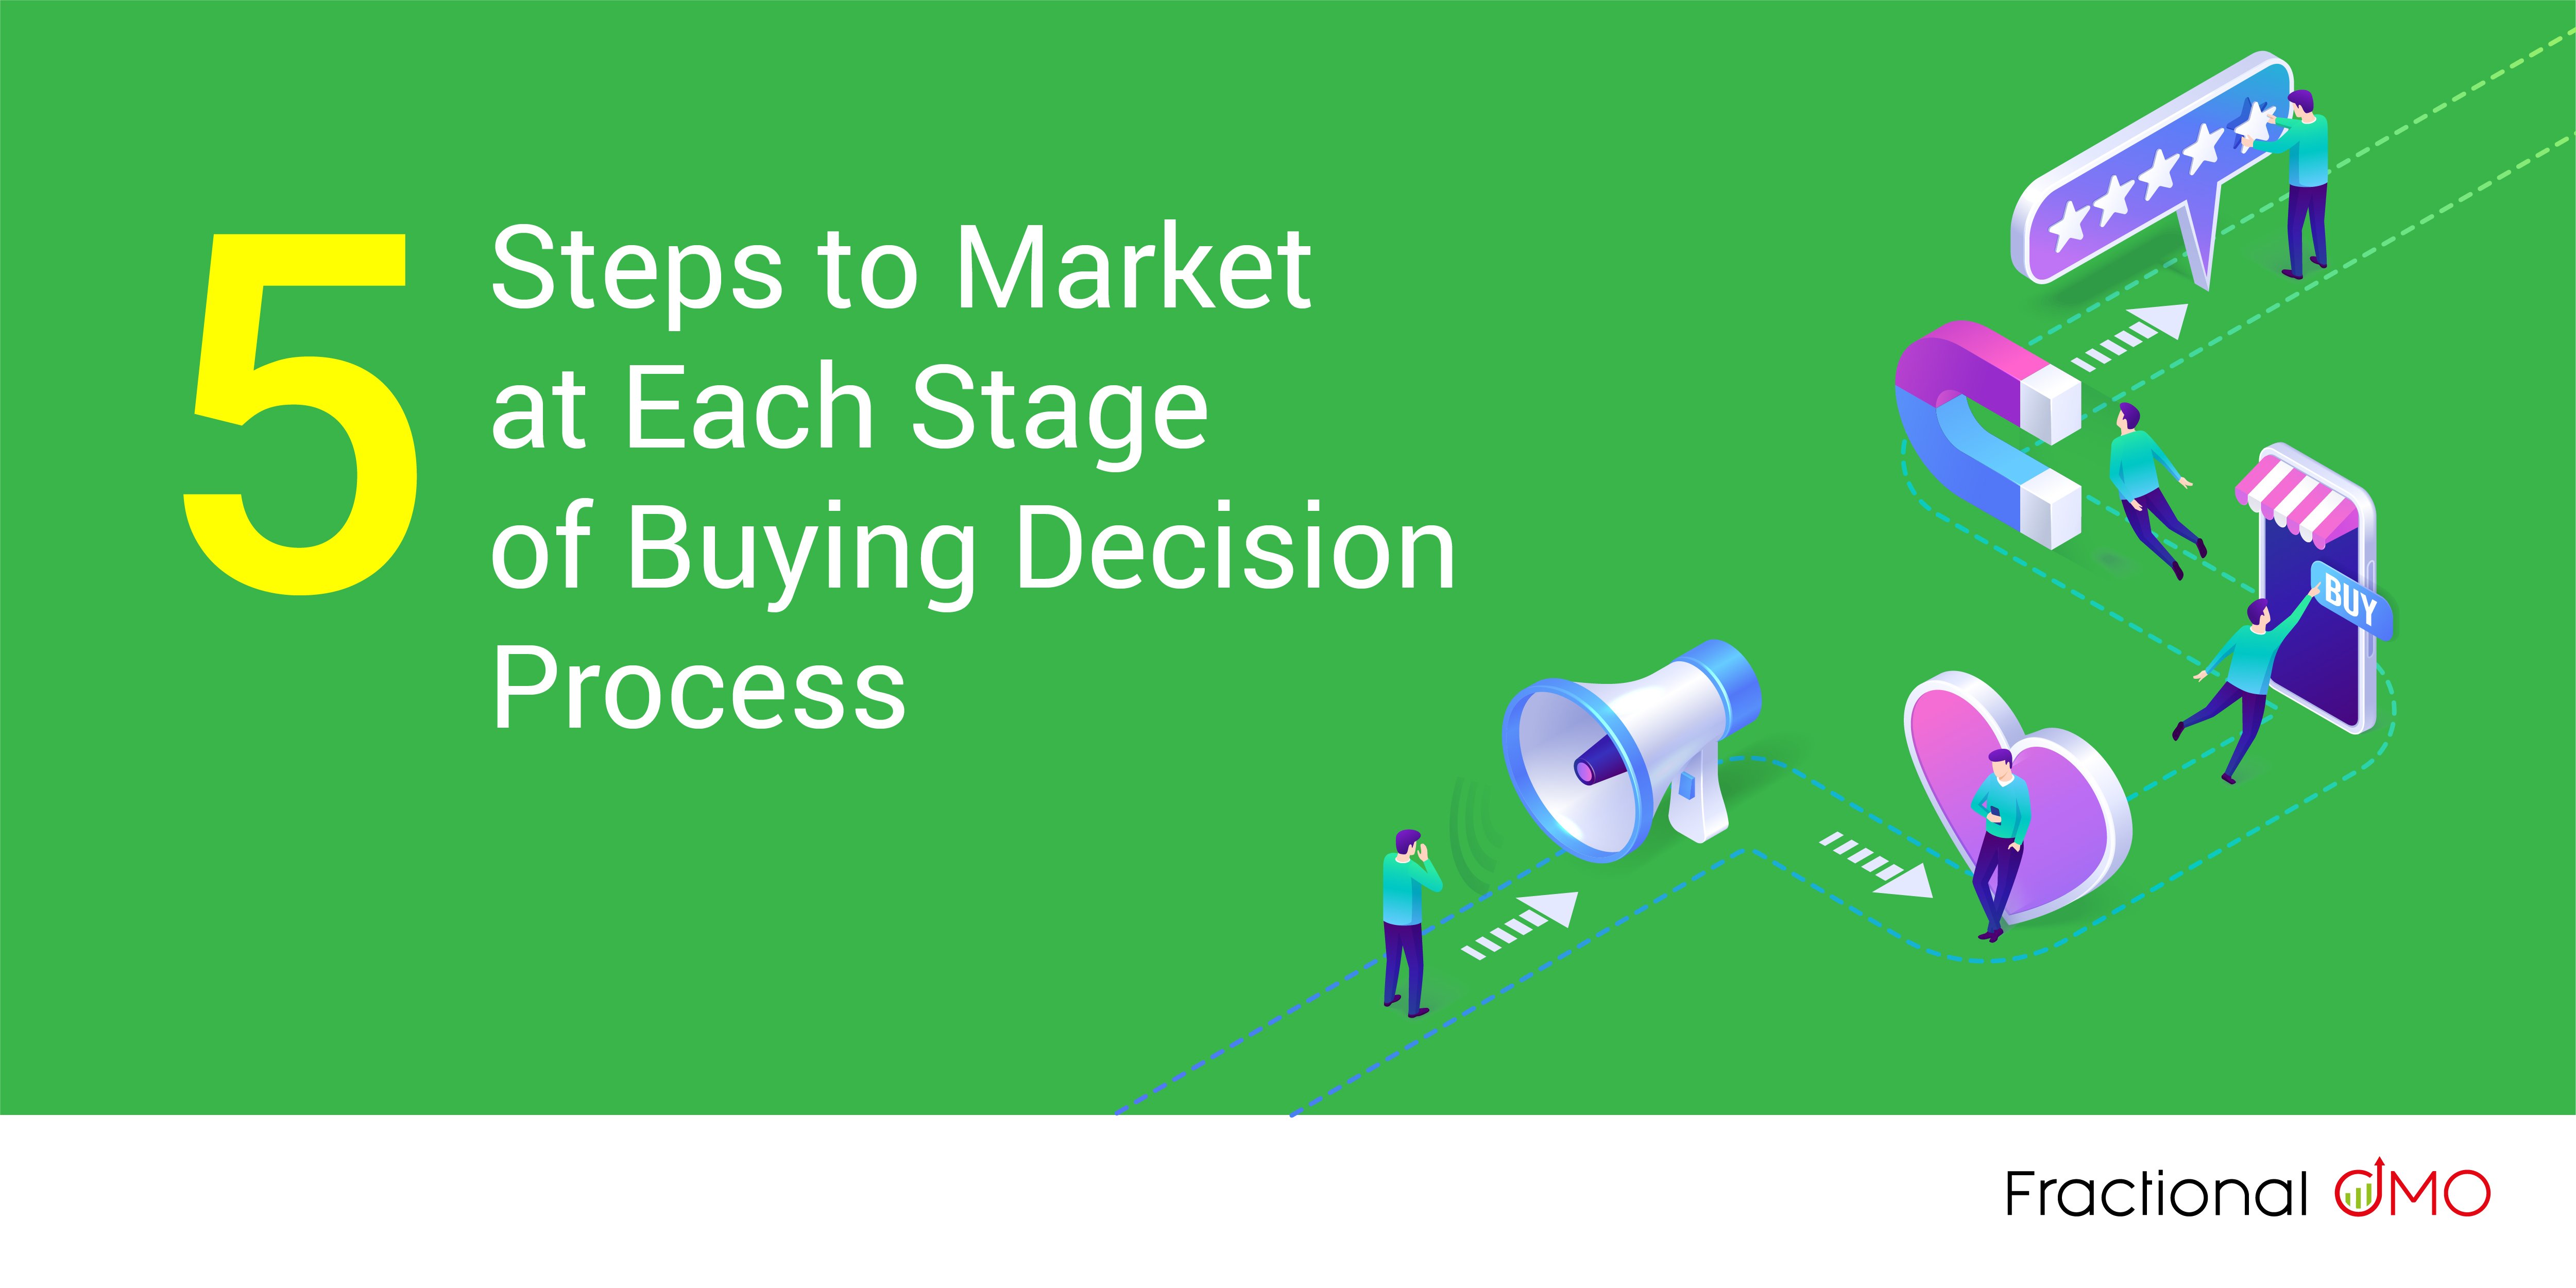 5 steps to market at each stage of buying decision process